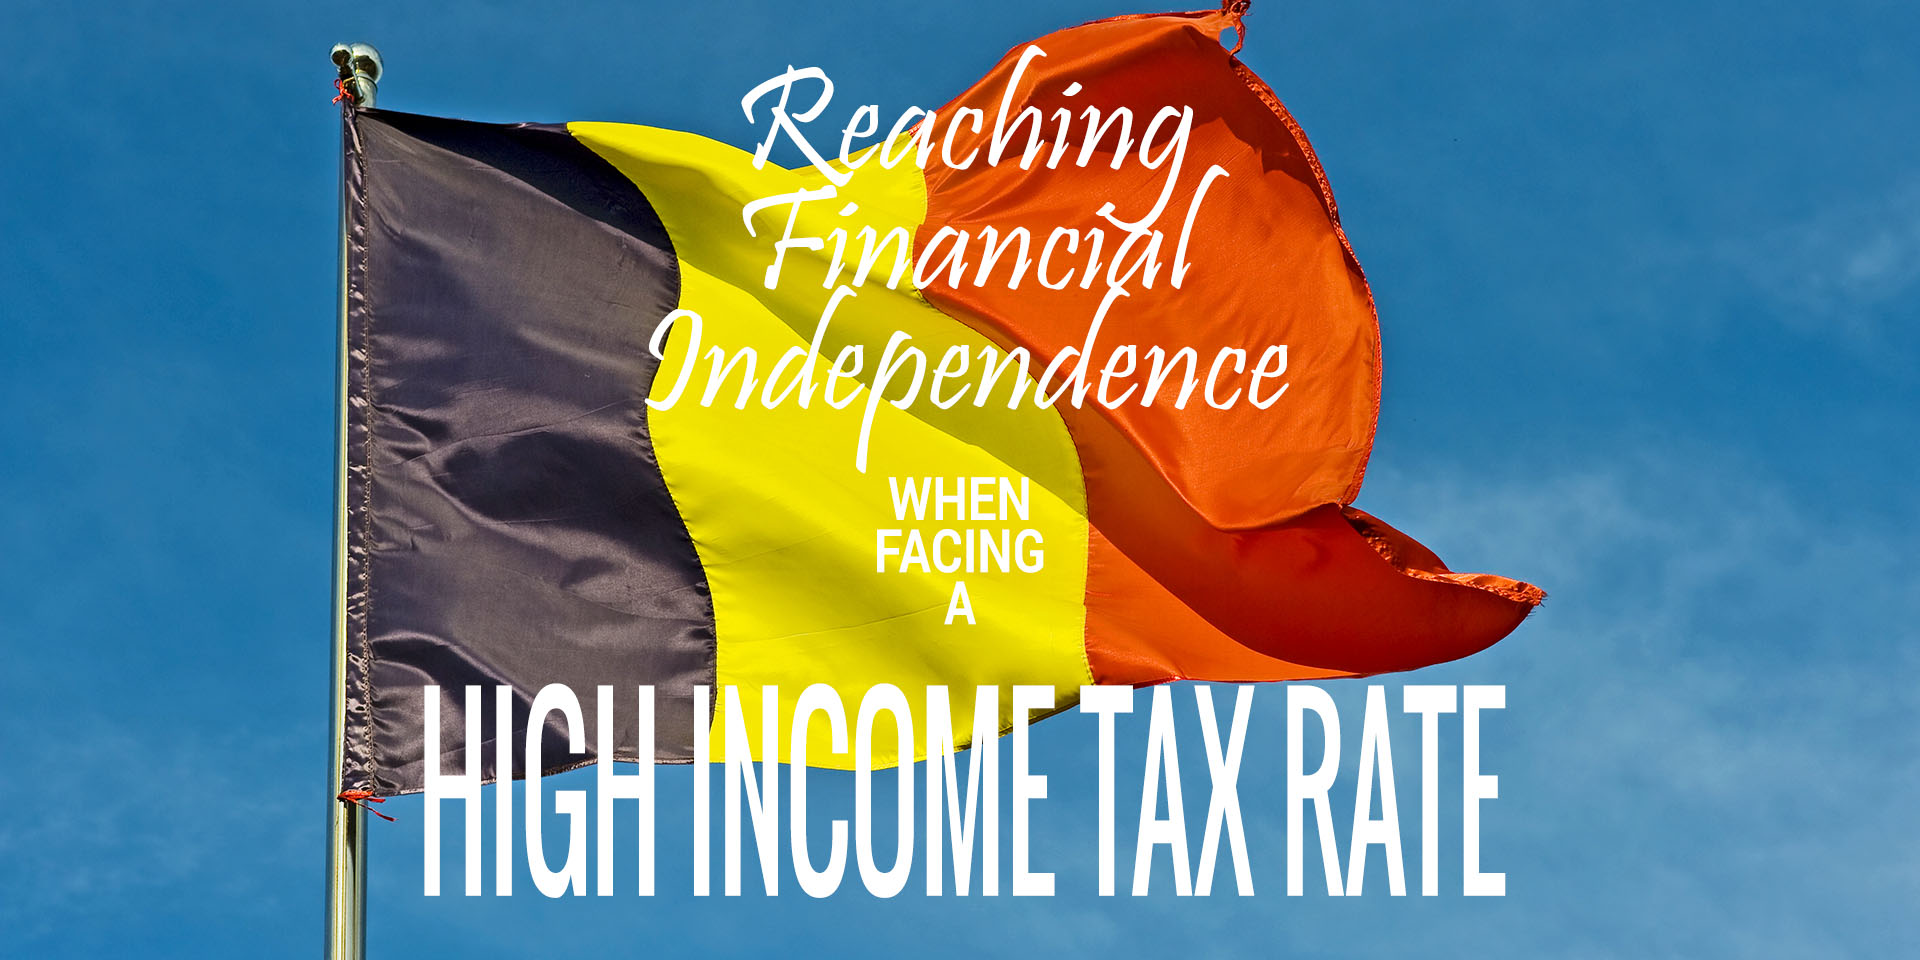 Reaching Financial Independence When Facing the Highest Income Tax Rate in the Western World